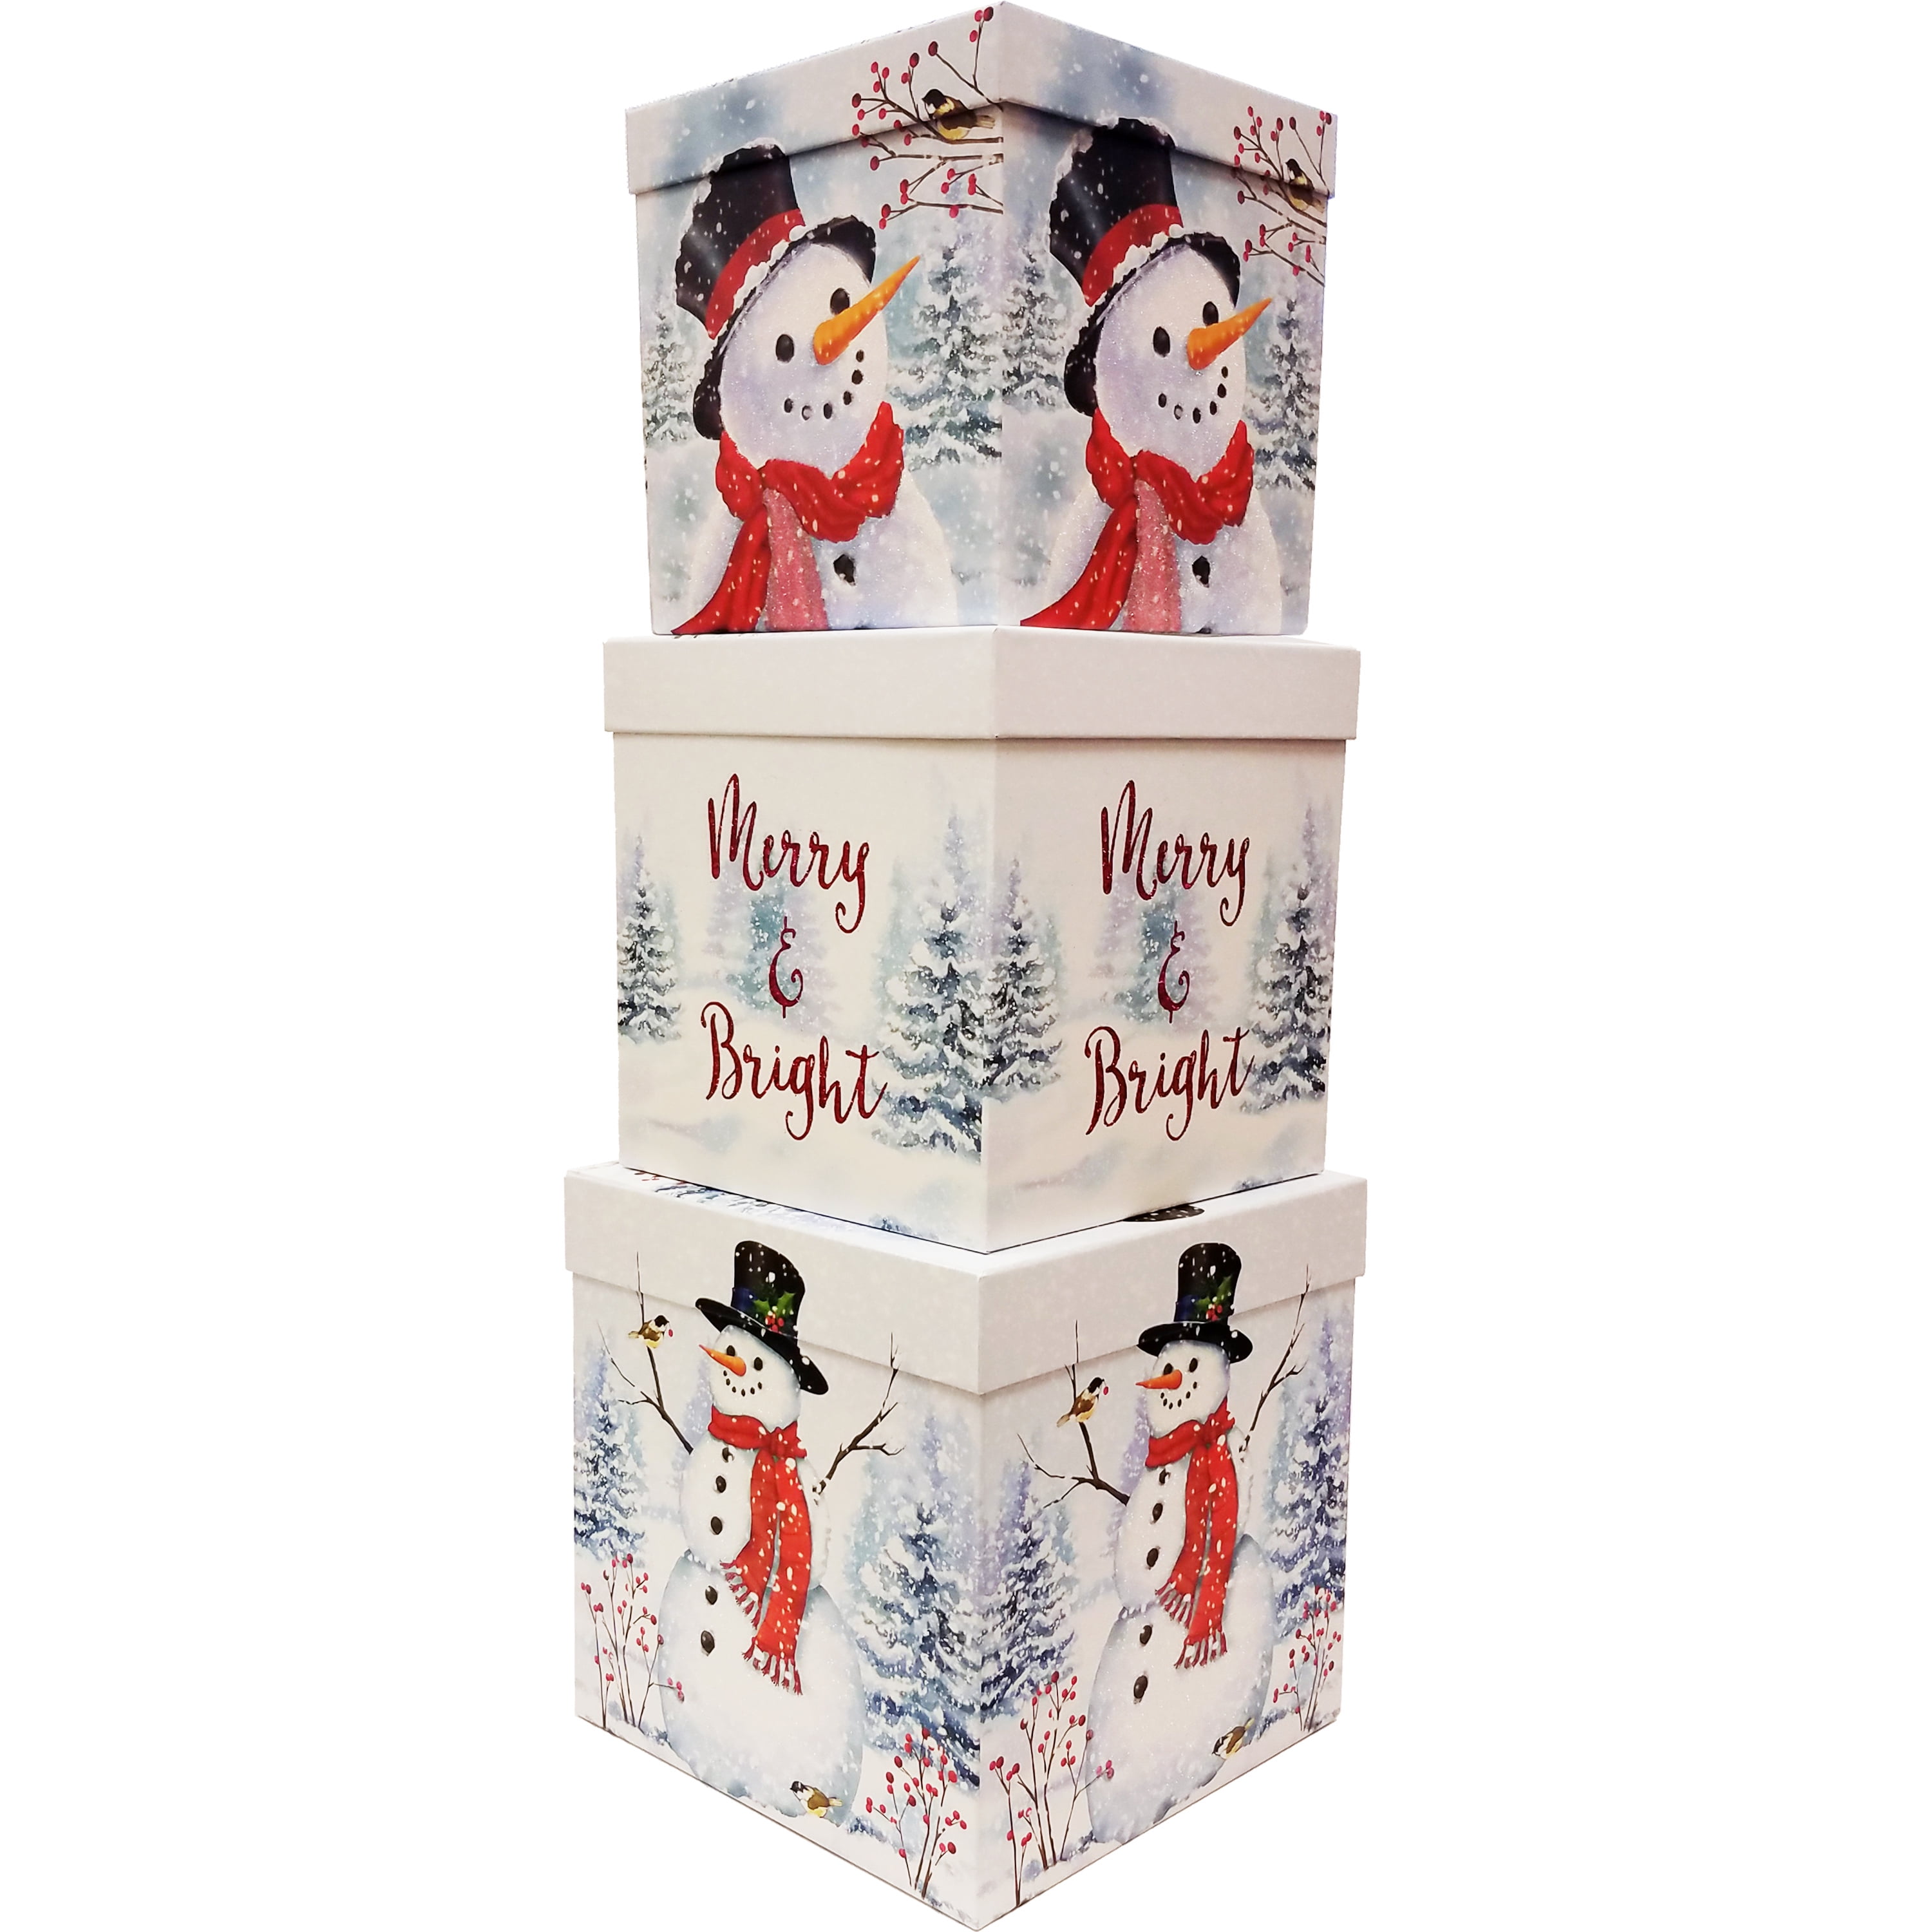 Holiday Time Square Christmas Gift Boxes, Red and White Snowman, 3 Sizes, Set of 3